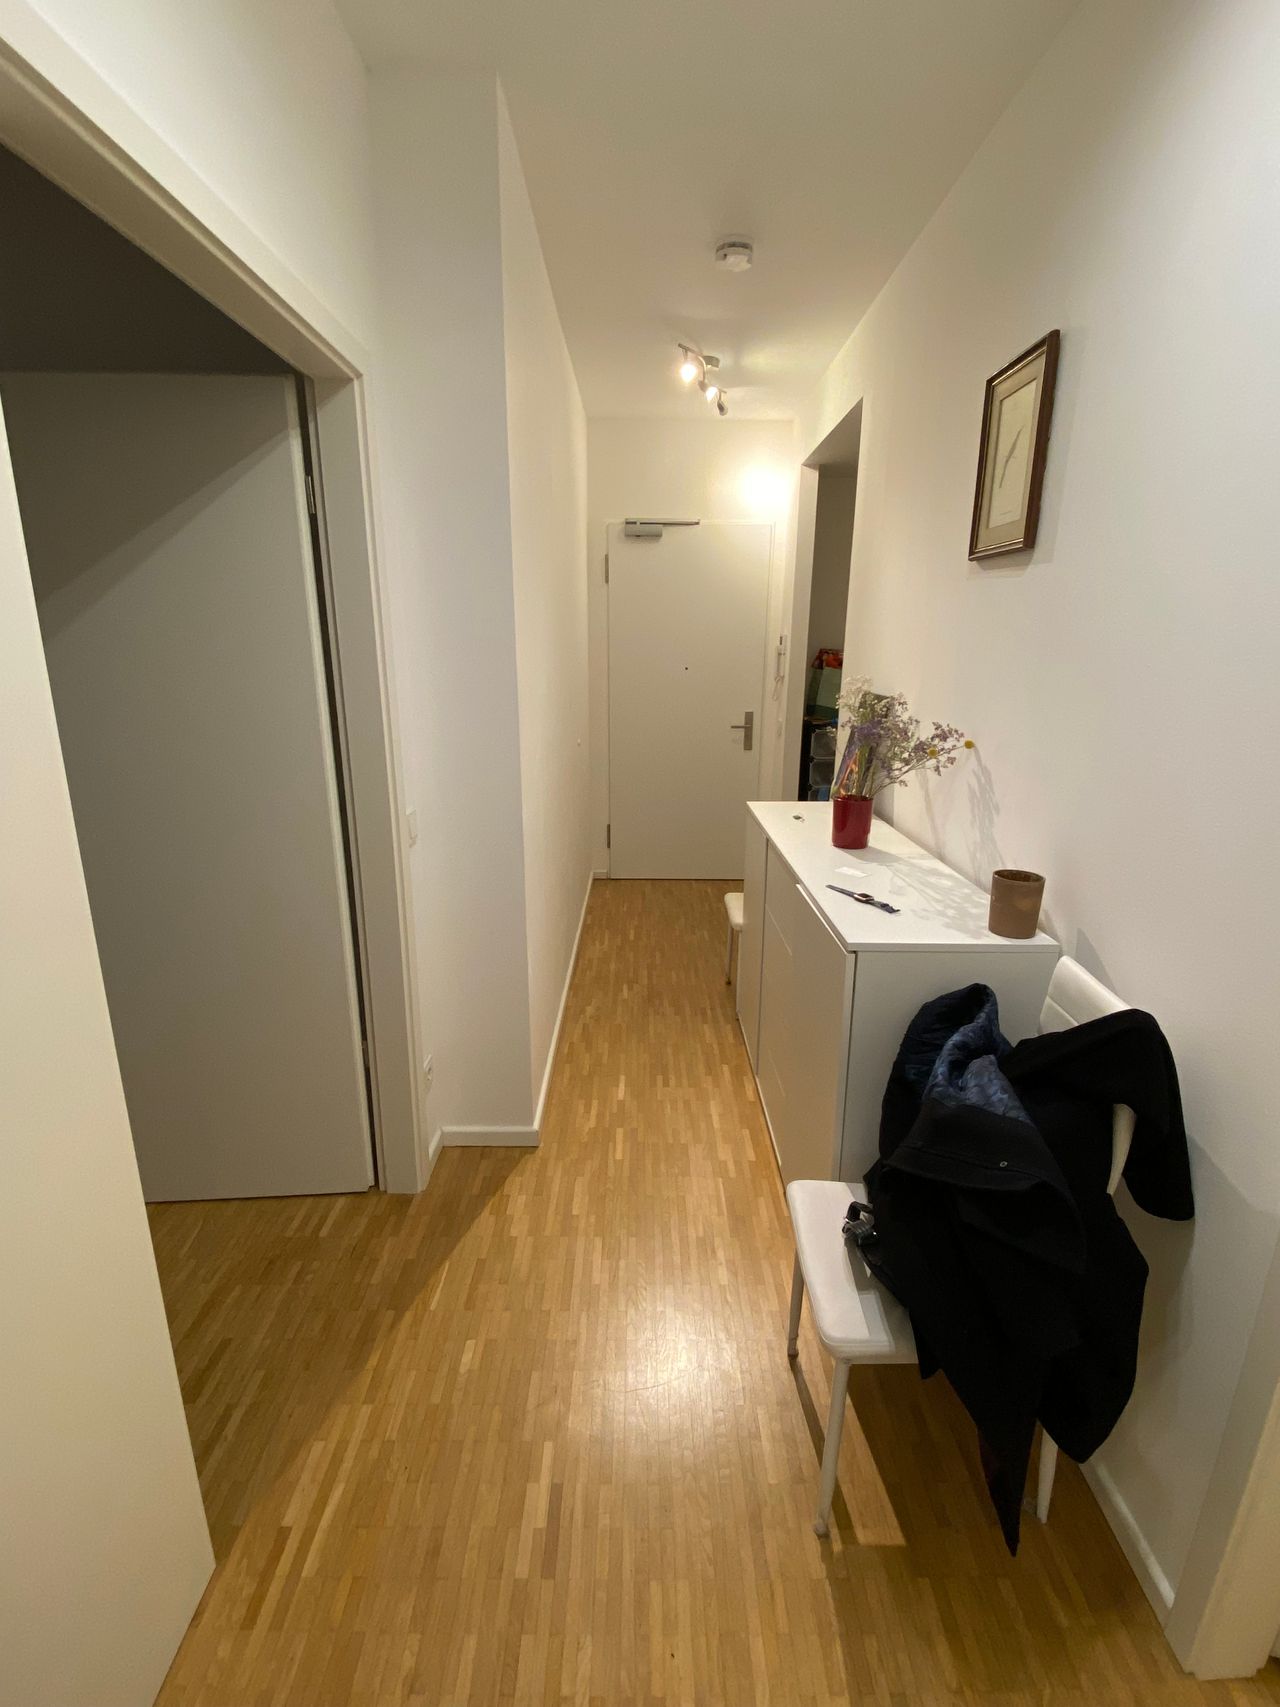 New and furnished apartment in berlin Mitte